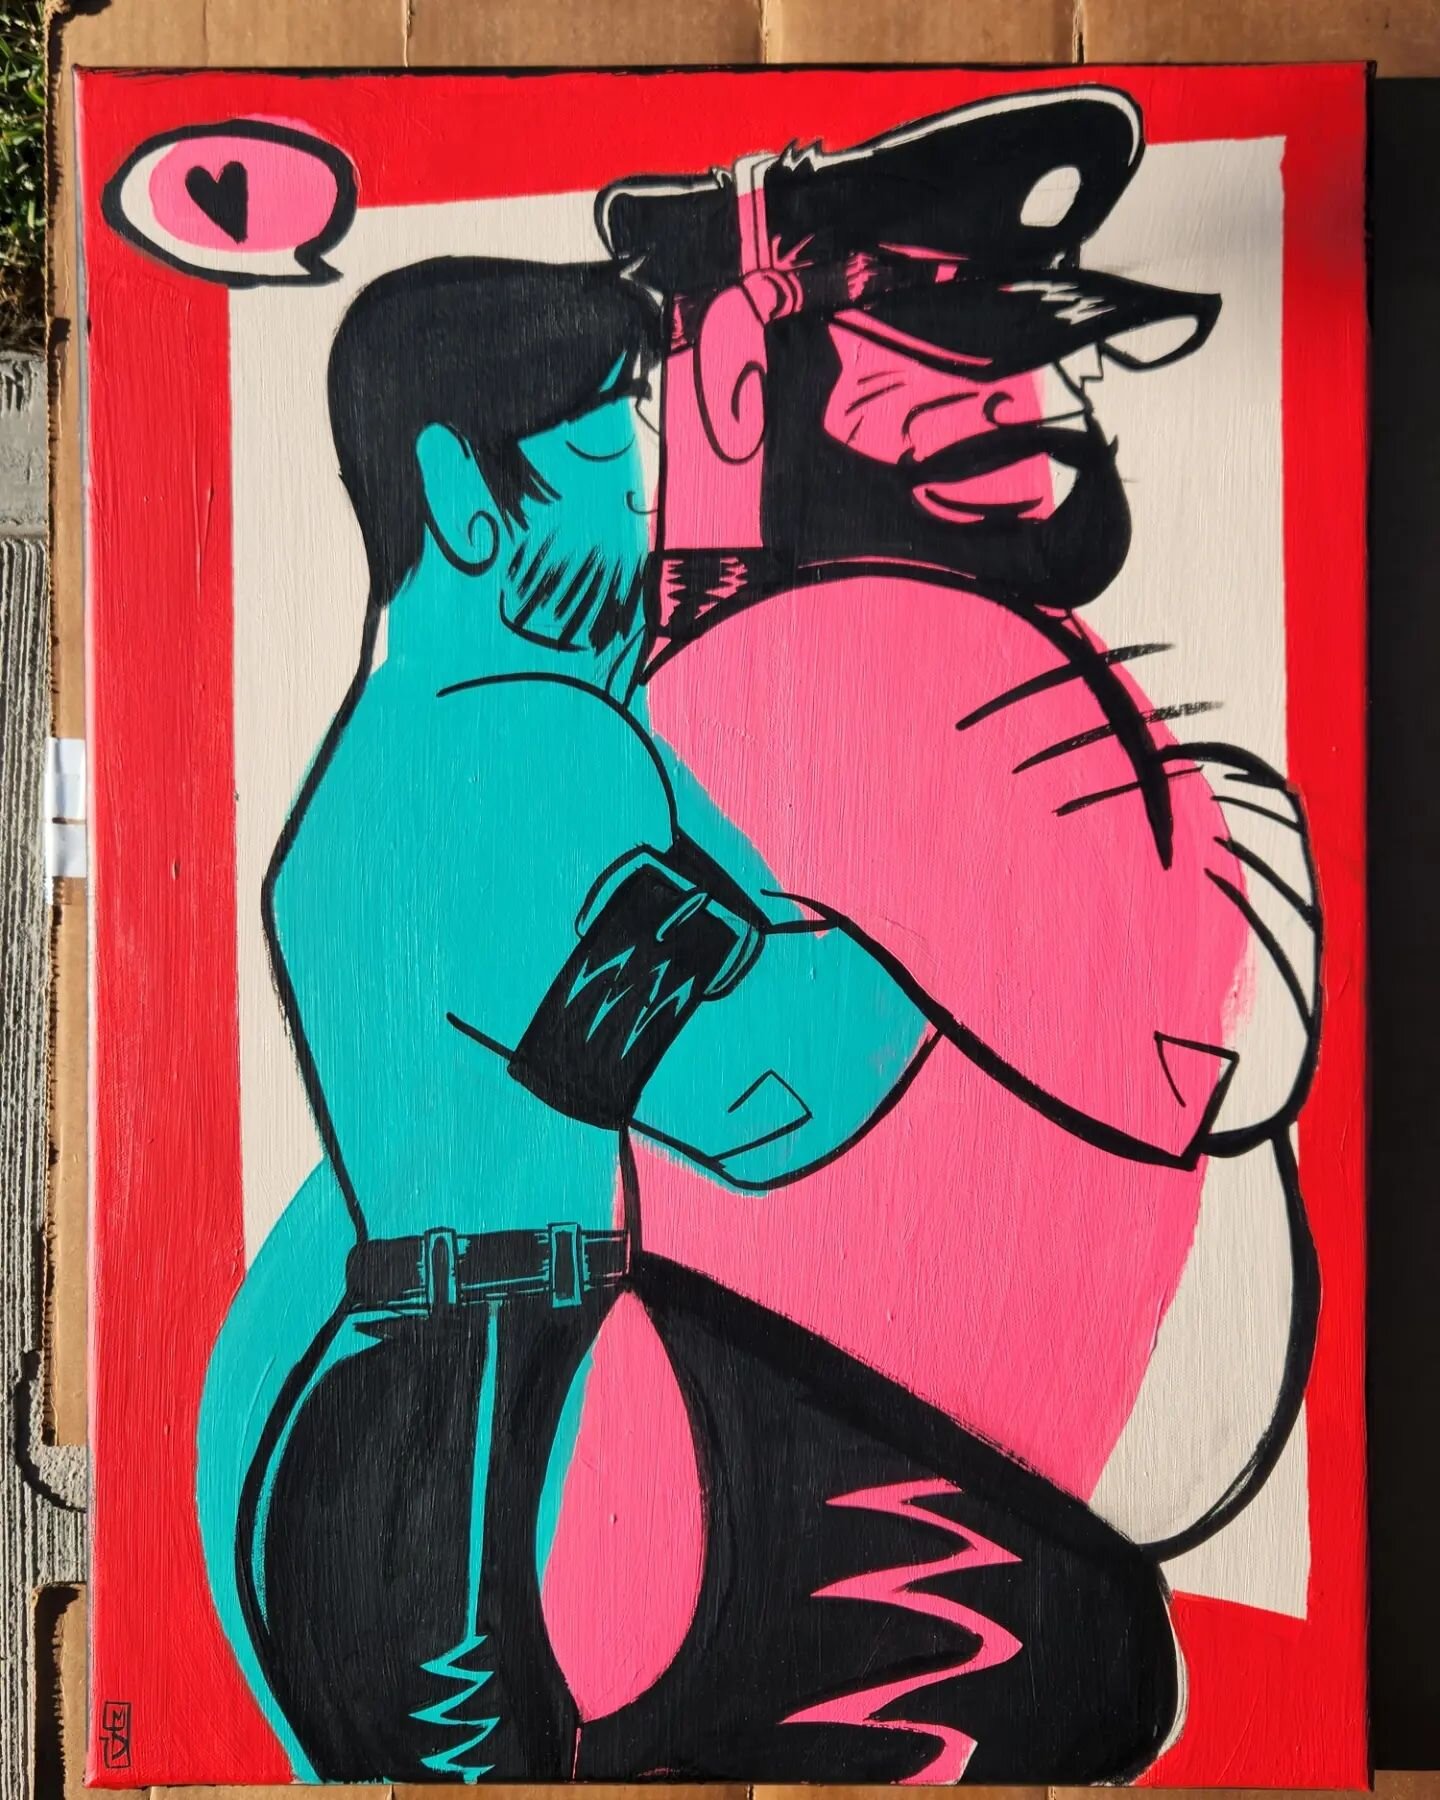 Here With You
Acyrlic and ink on canvas
18&quot;&times;24&quot; 

This is my entry for the Tom of Finland Artist competition

#bear #gaybear #daddy #gaydaddy #chub #gaychub #dilf #leather #leatherdaddy #leatherbear #cigar #cigarsmoke #cigars #leather